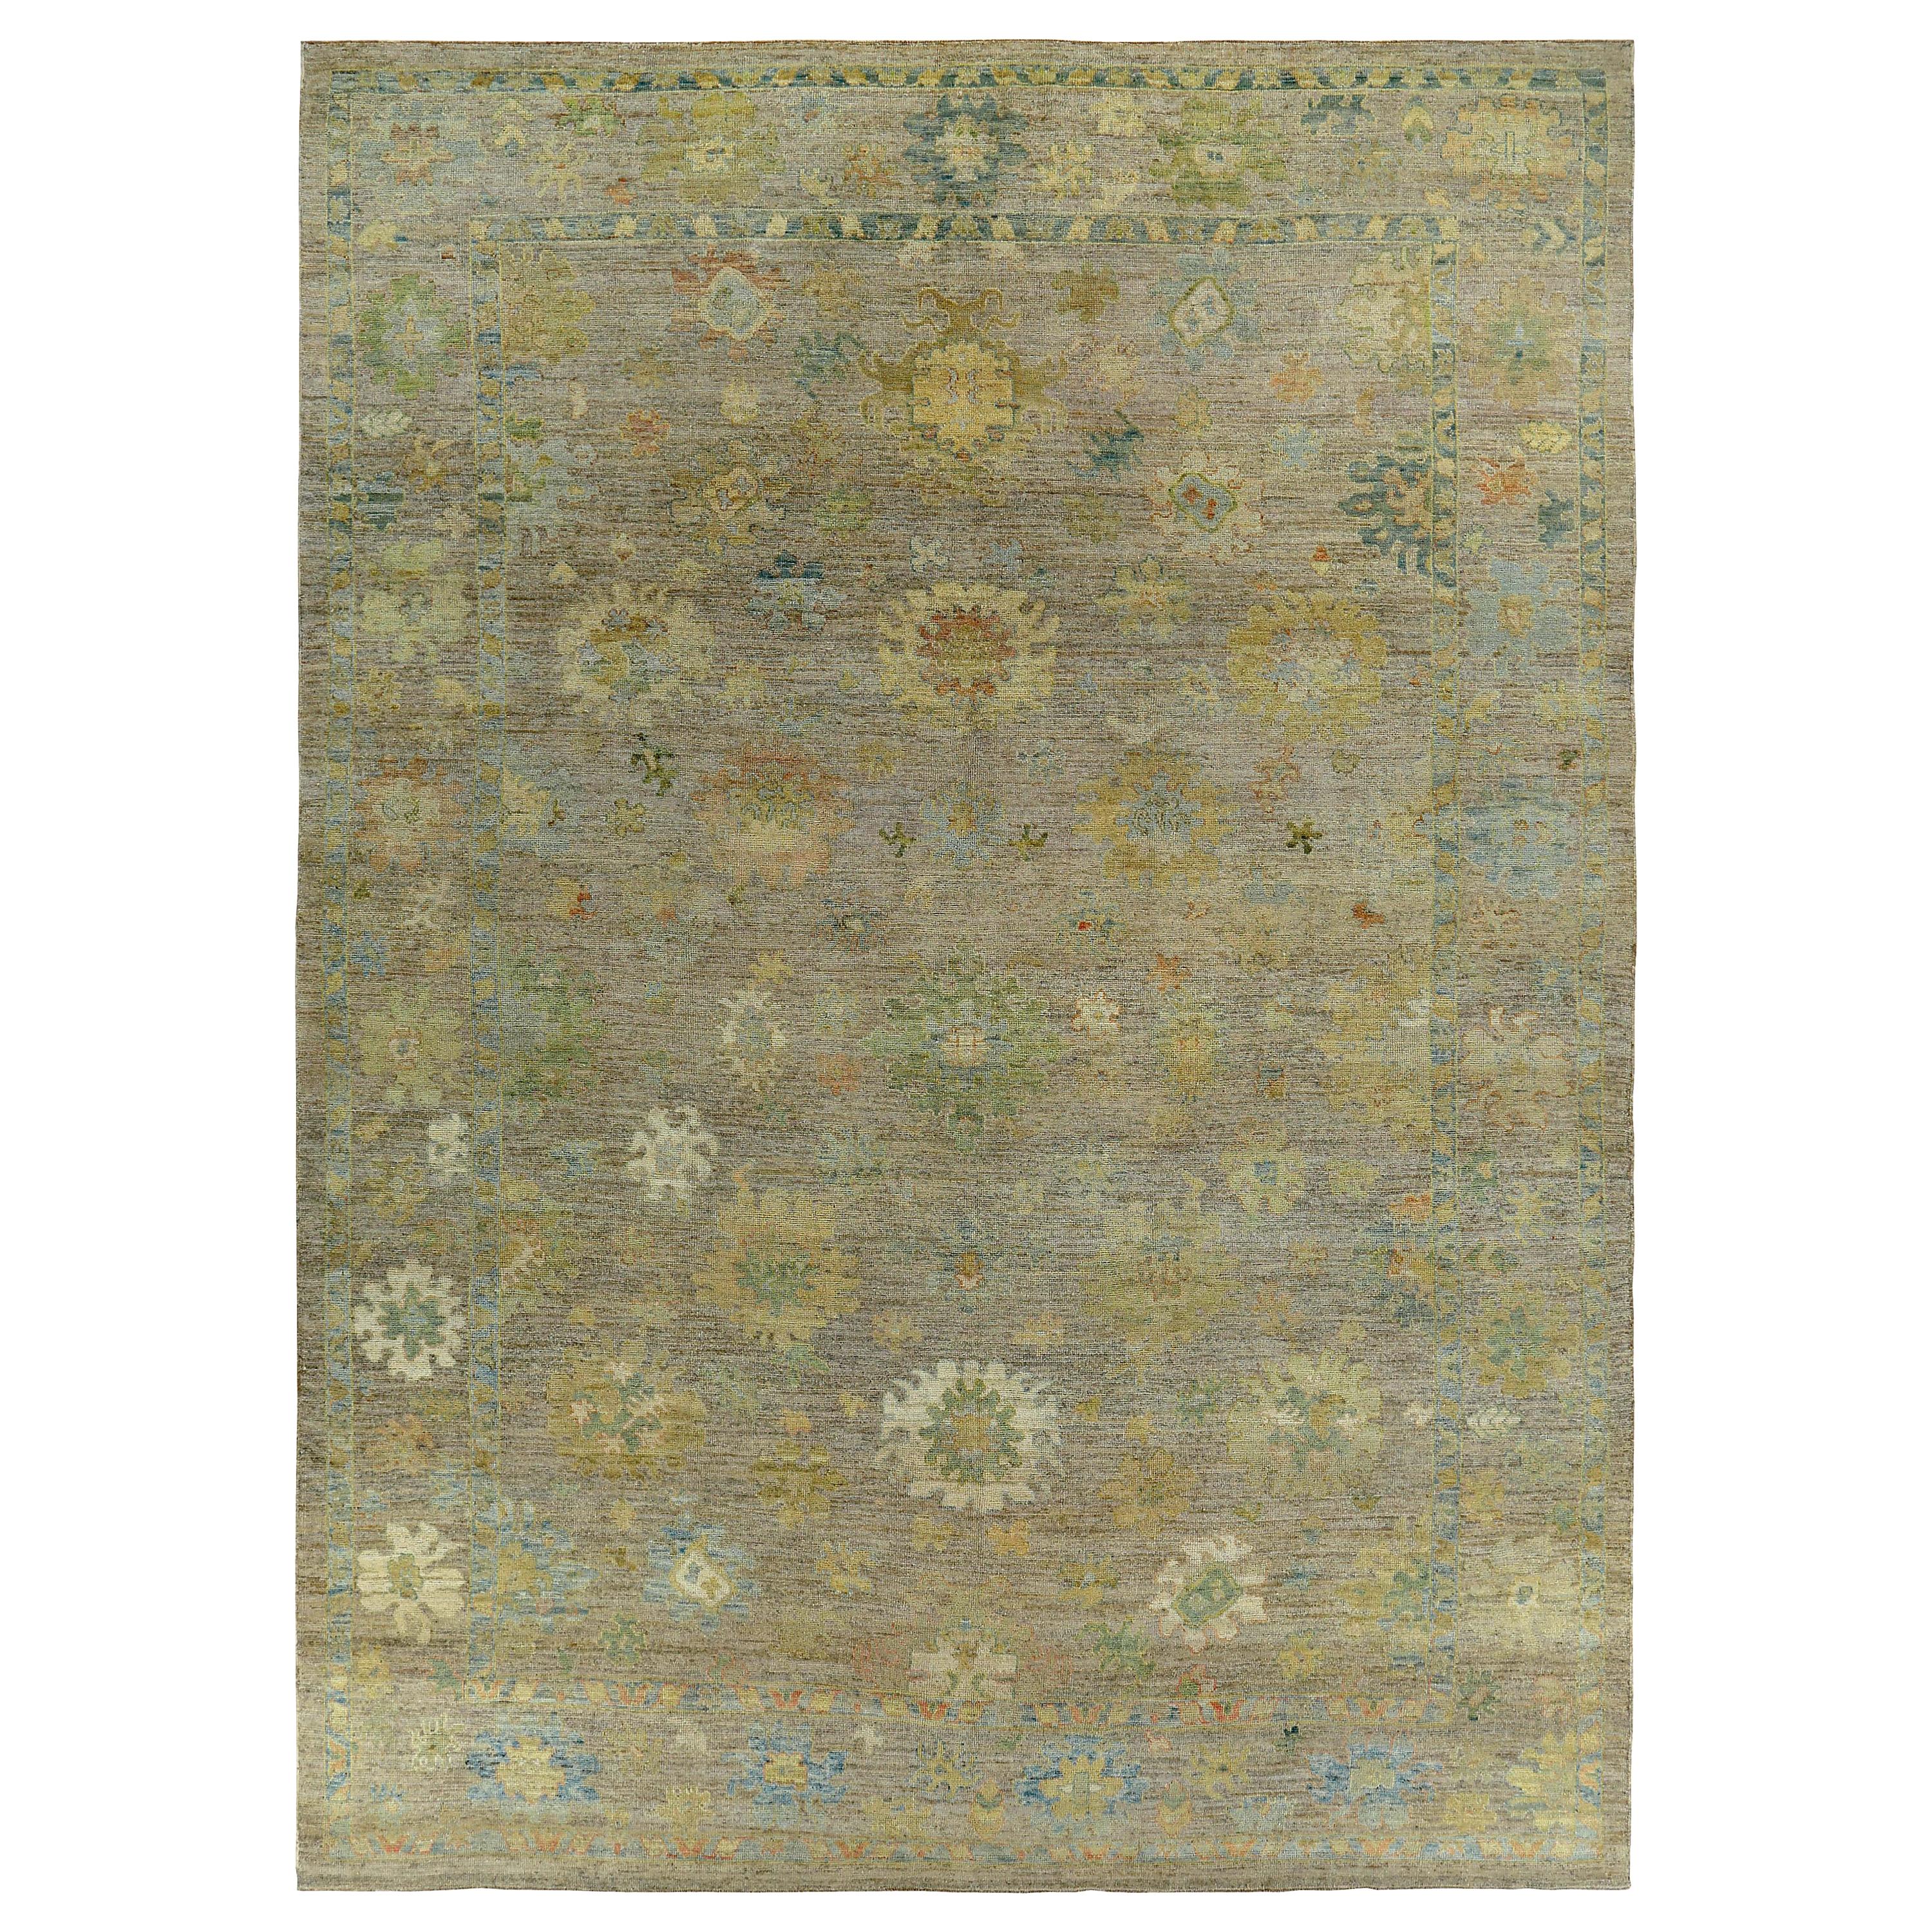 New Turkish Oushak Rug with Green and Yellow Floral Design on a Brown Field